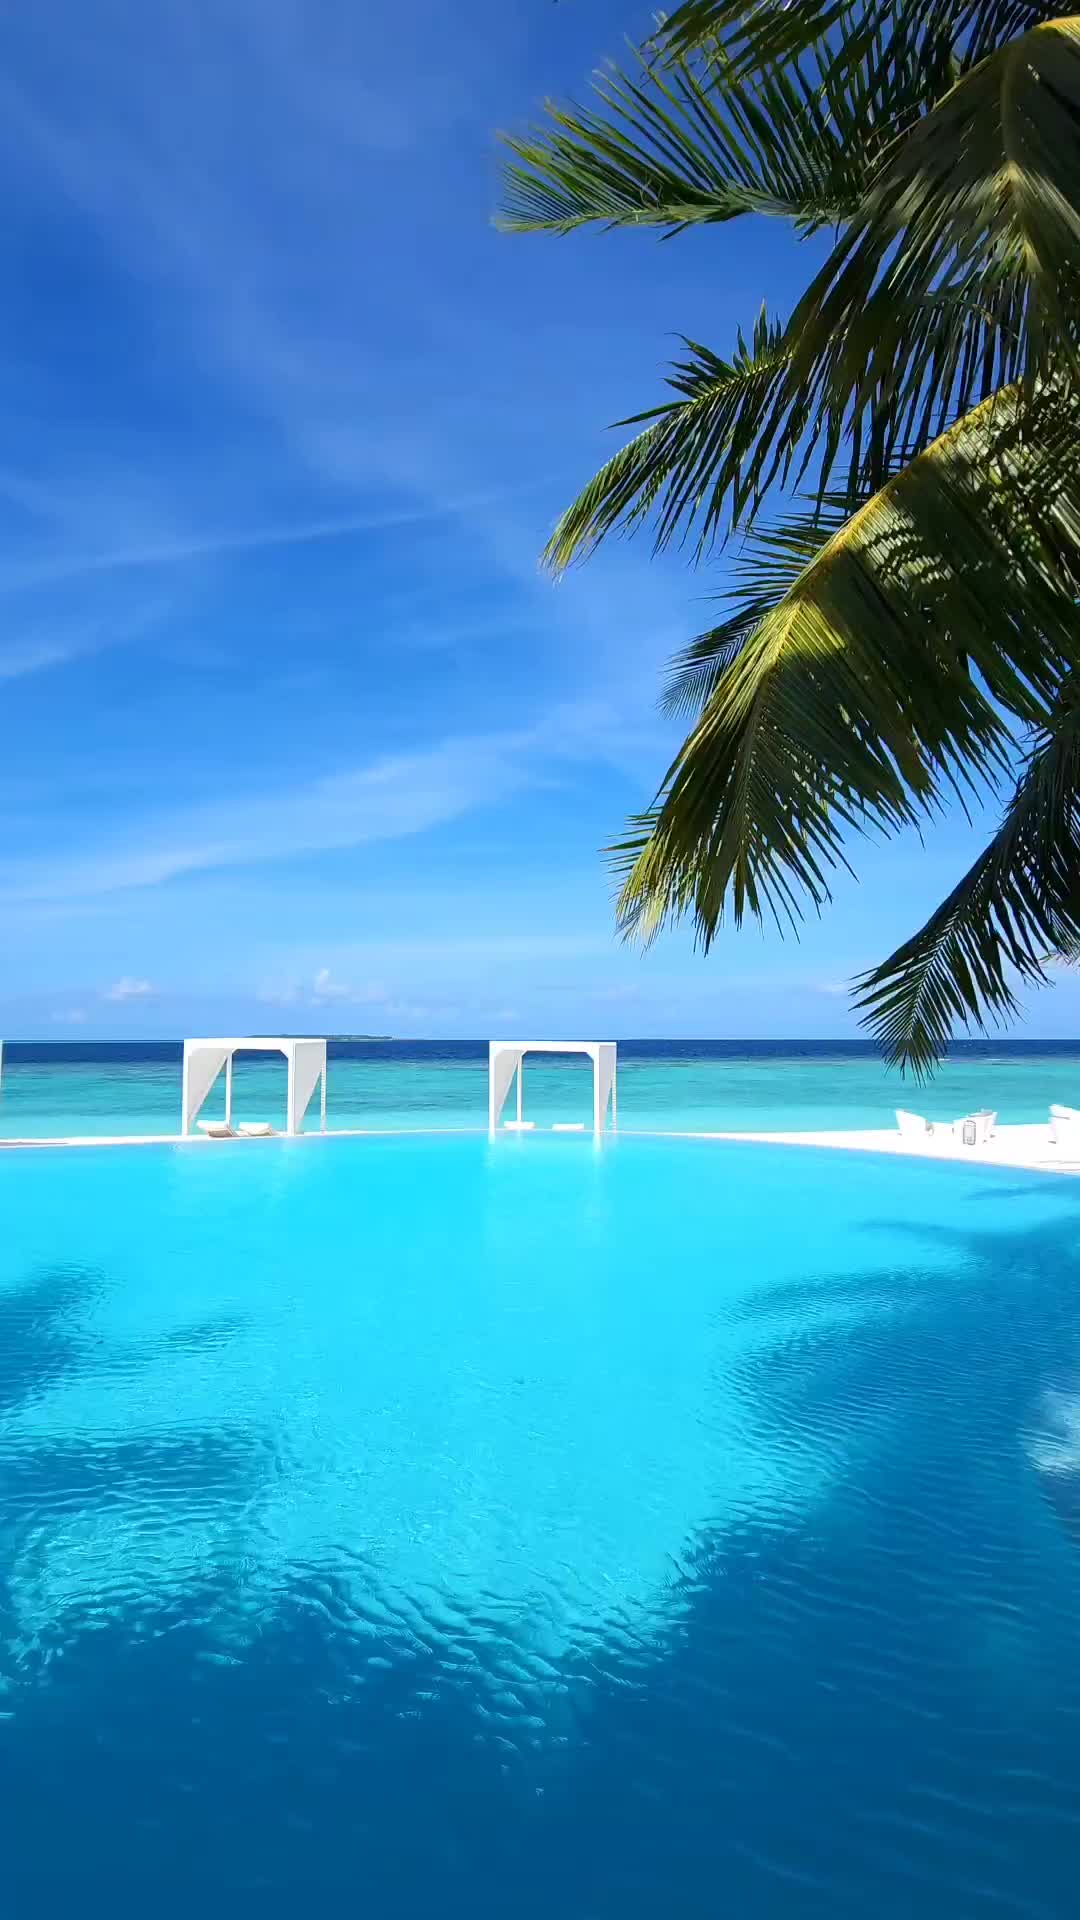 7 Seconds in a Top Luxury Resort in the Maldives